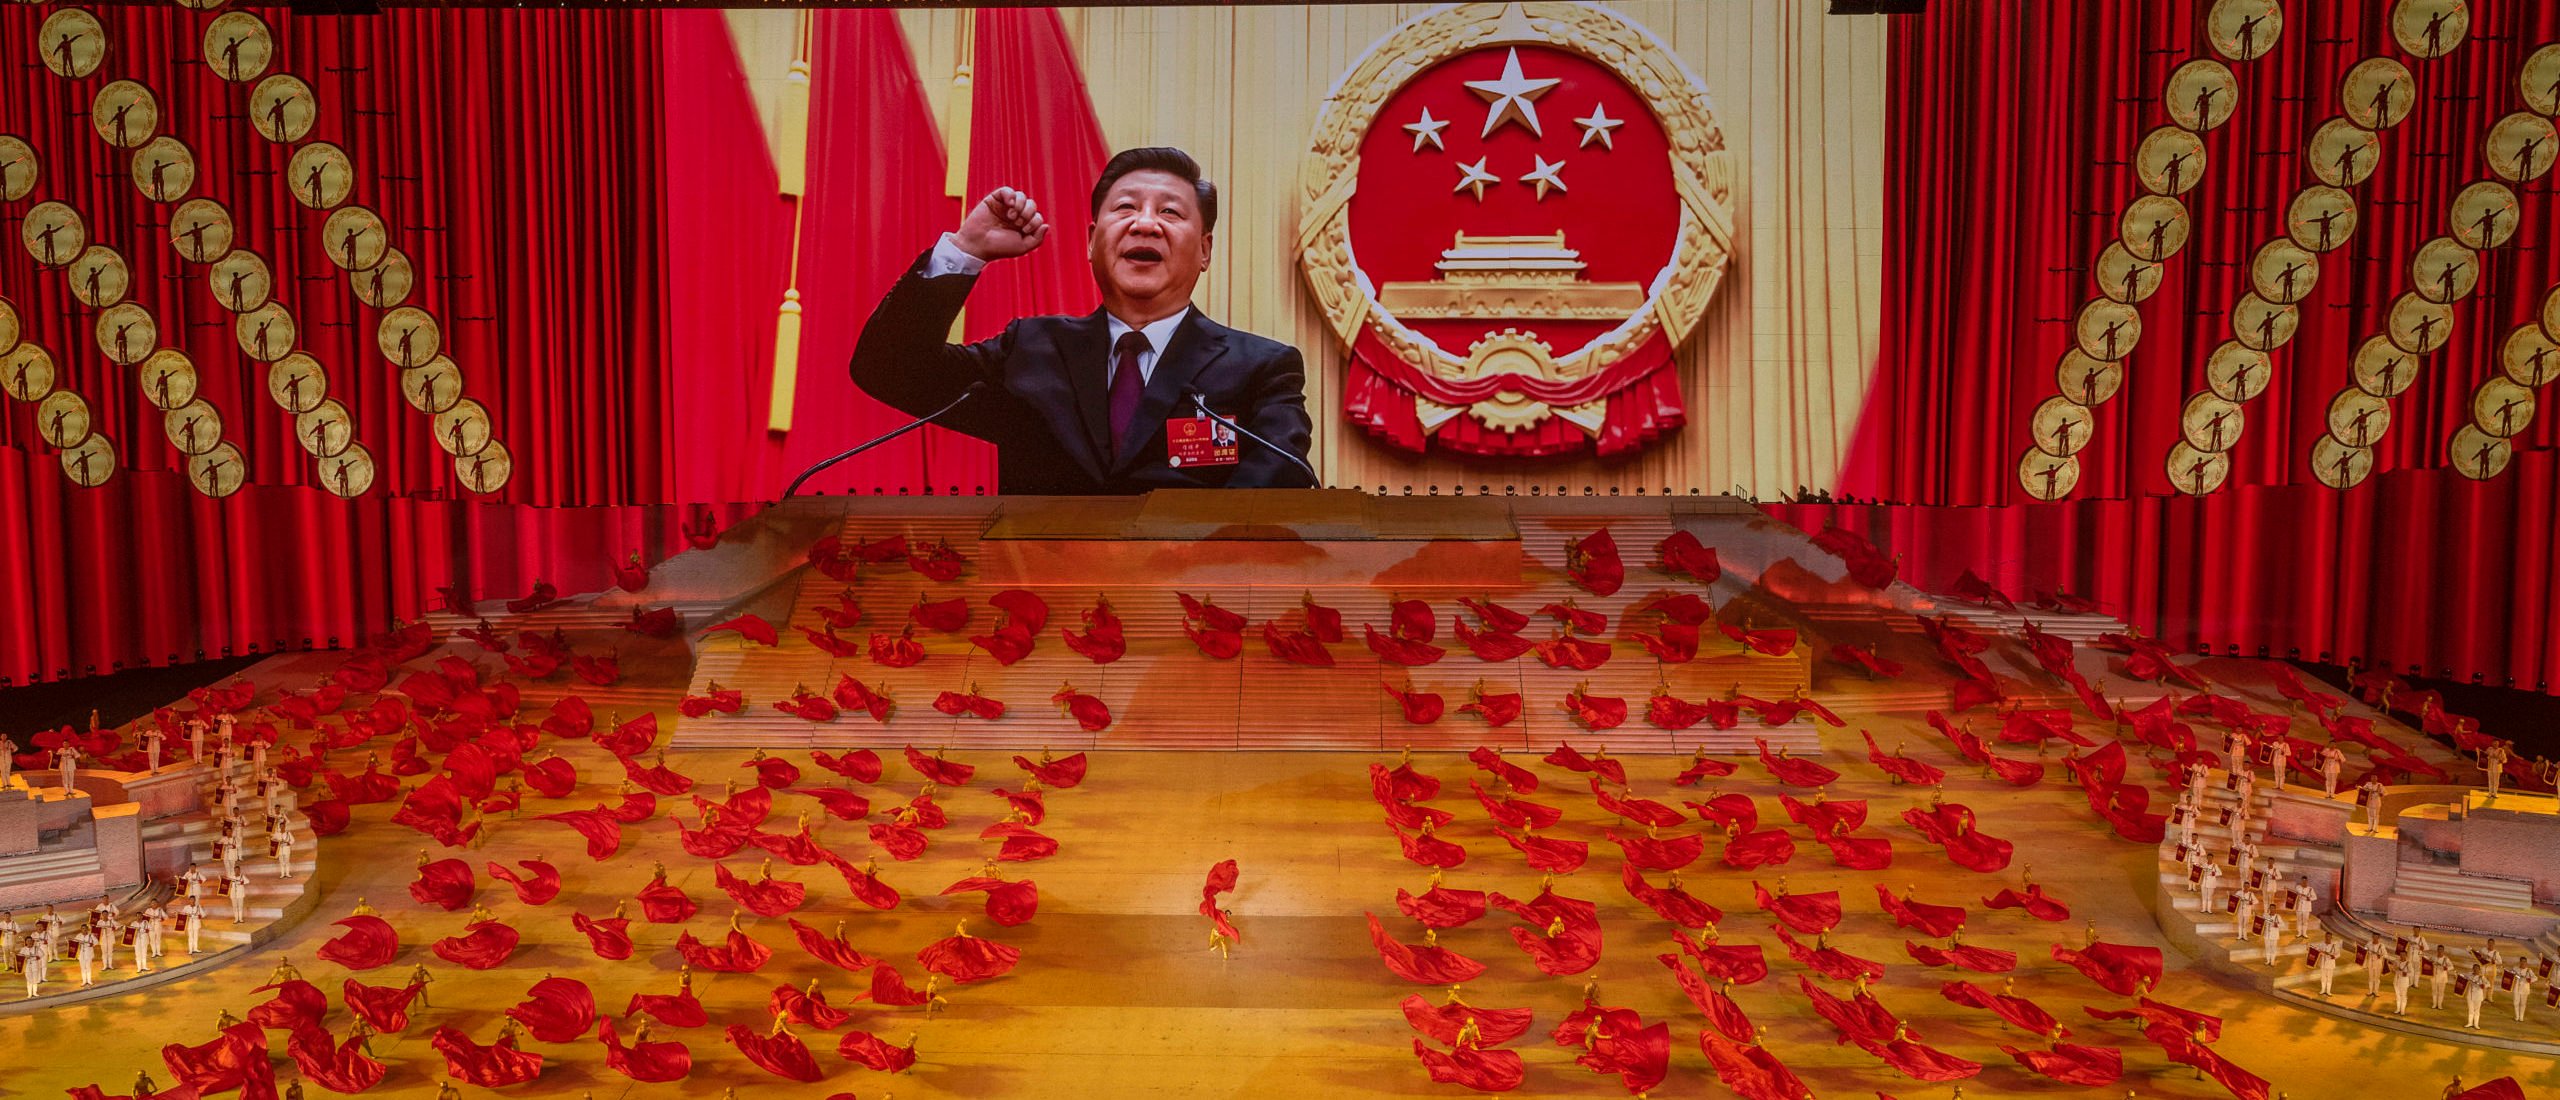 China marked the 100th anniversary of the founding of the Communist Party on July 1st. (Photo by Kevin Frayer/Getty Images)